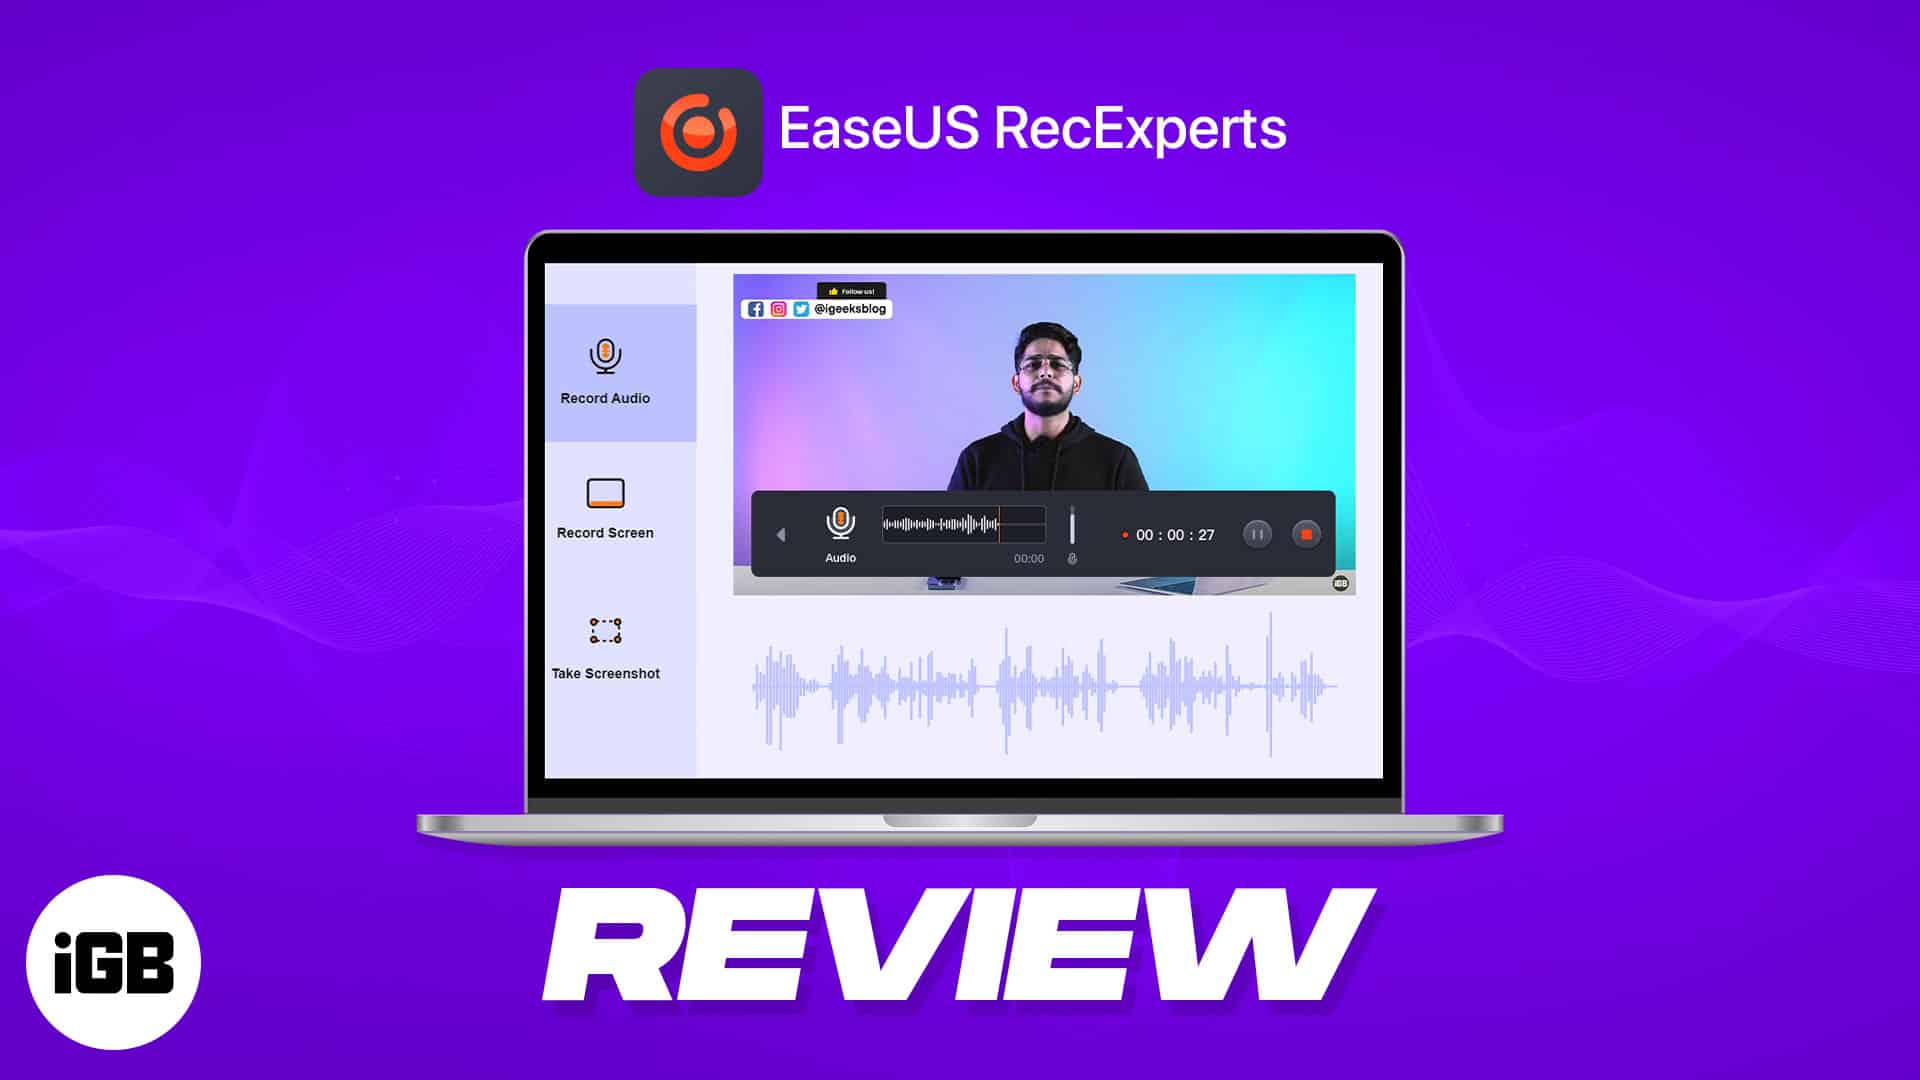 Detailed review of easeus recexperts